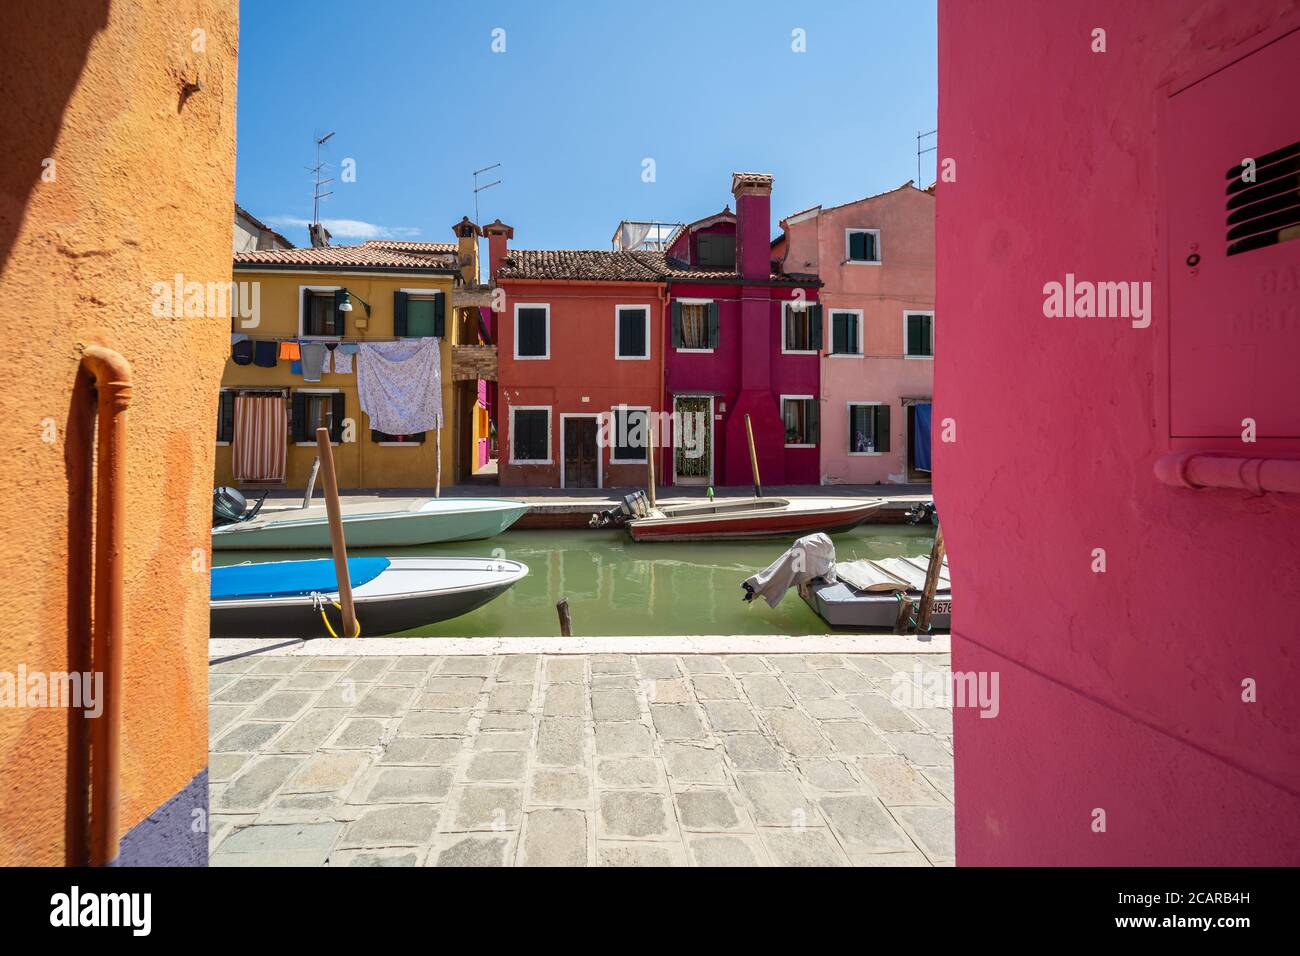 Burano island, Venetian Lagoon, Venice, Italy, panorama with the typical coloured homes overlooking a canal in the town centre Stock Photo